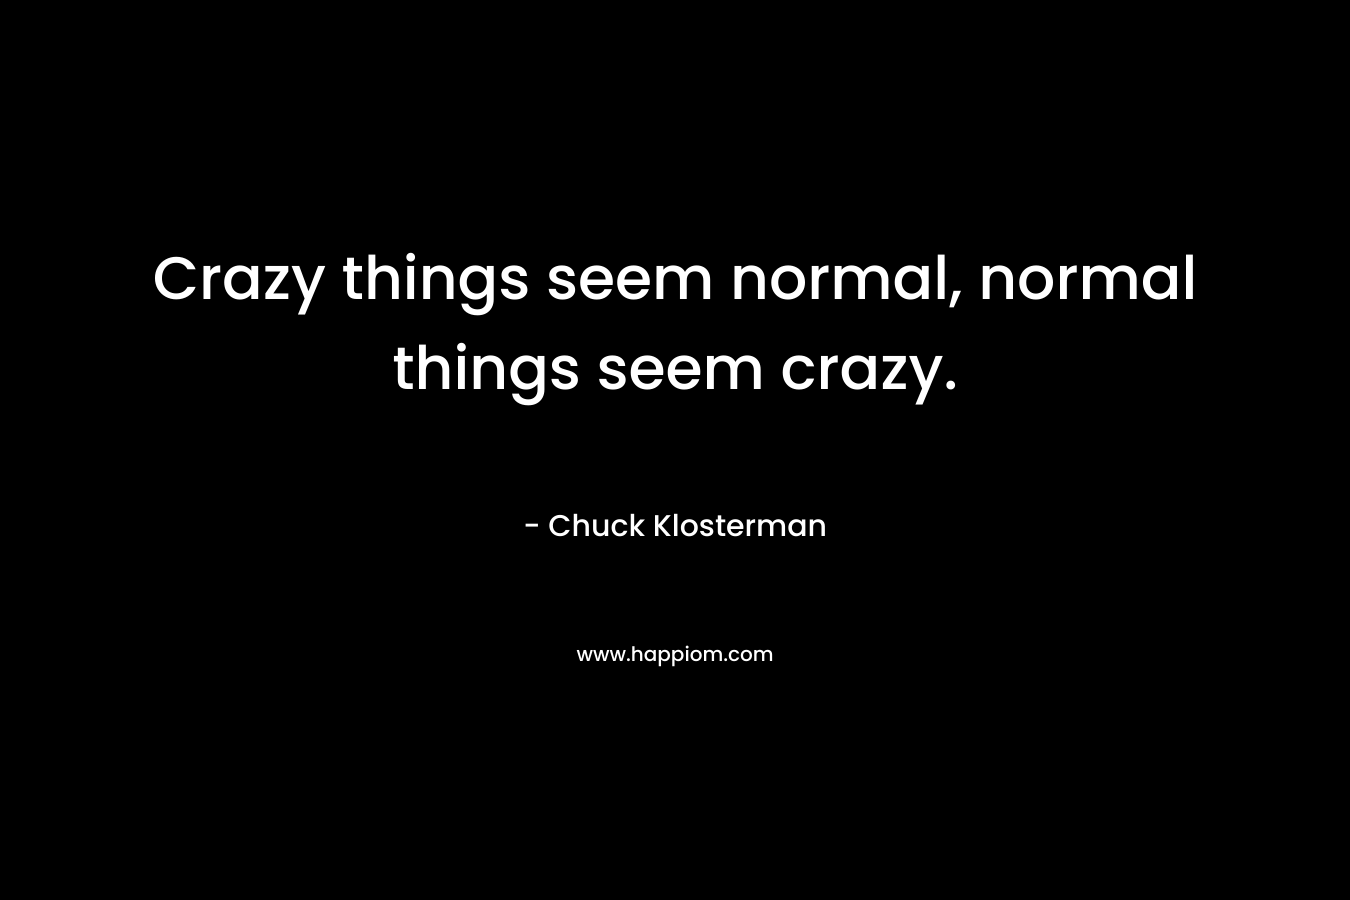 Crazy things seem normal, normal things seem crazy. – Chuck Klosterman